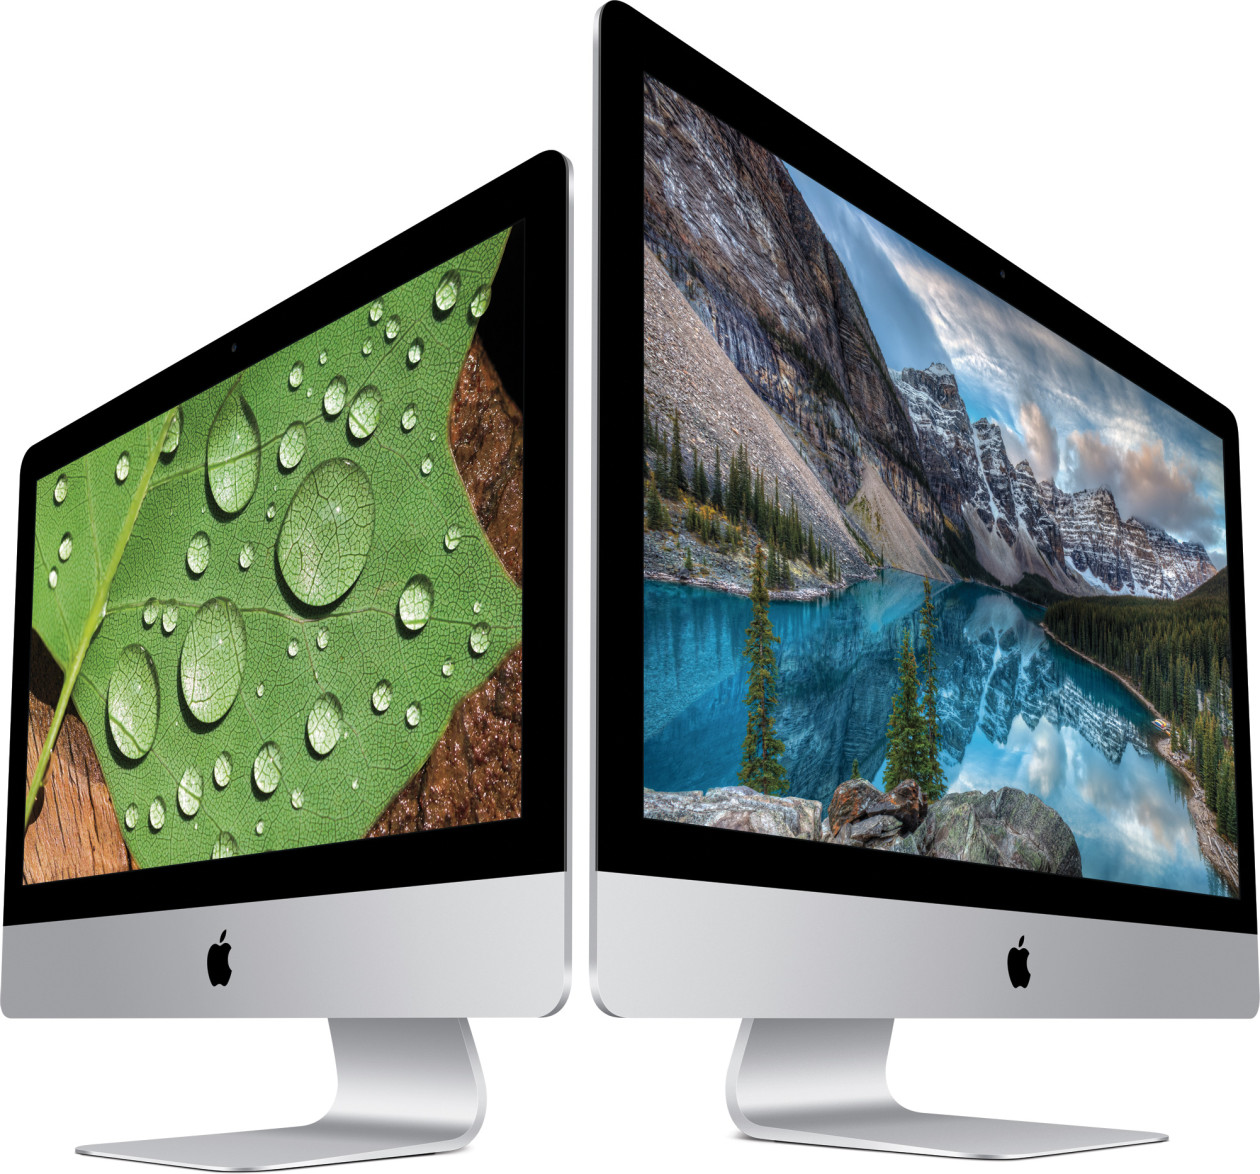 Tim Cook says: Macs are not forgotten and new desktops will be released